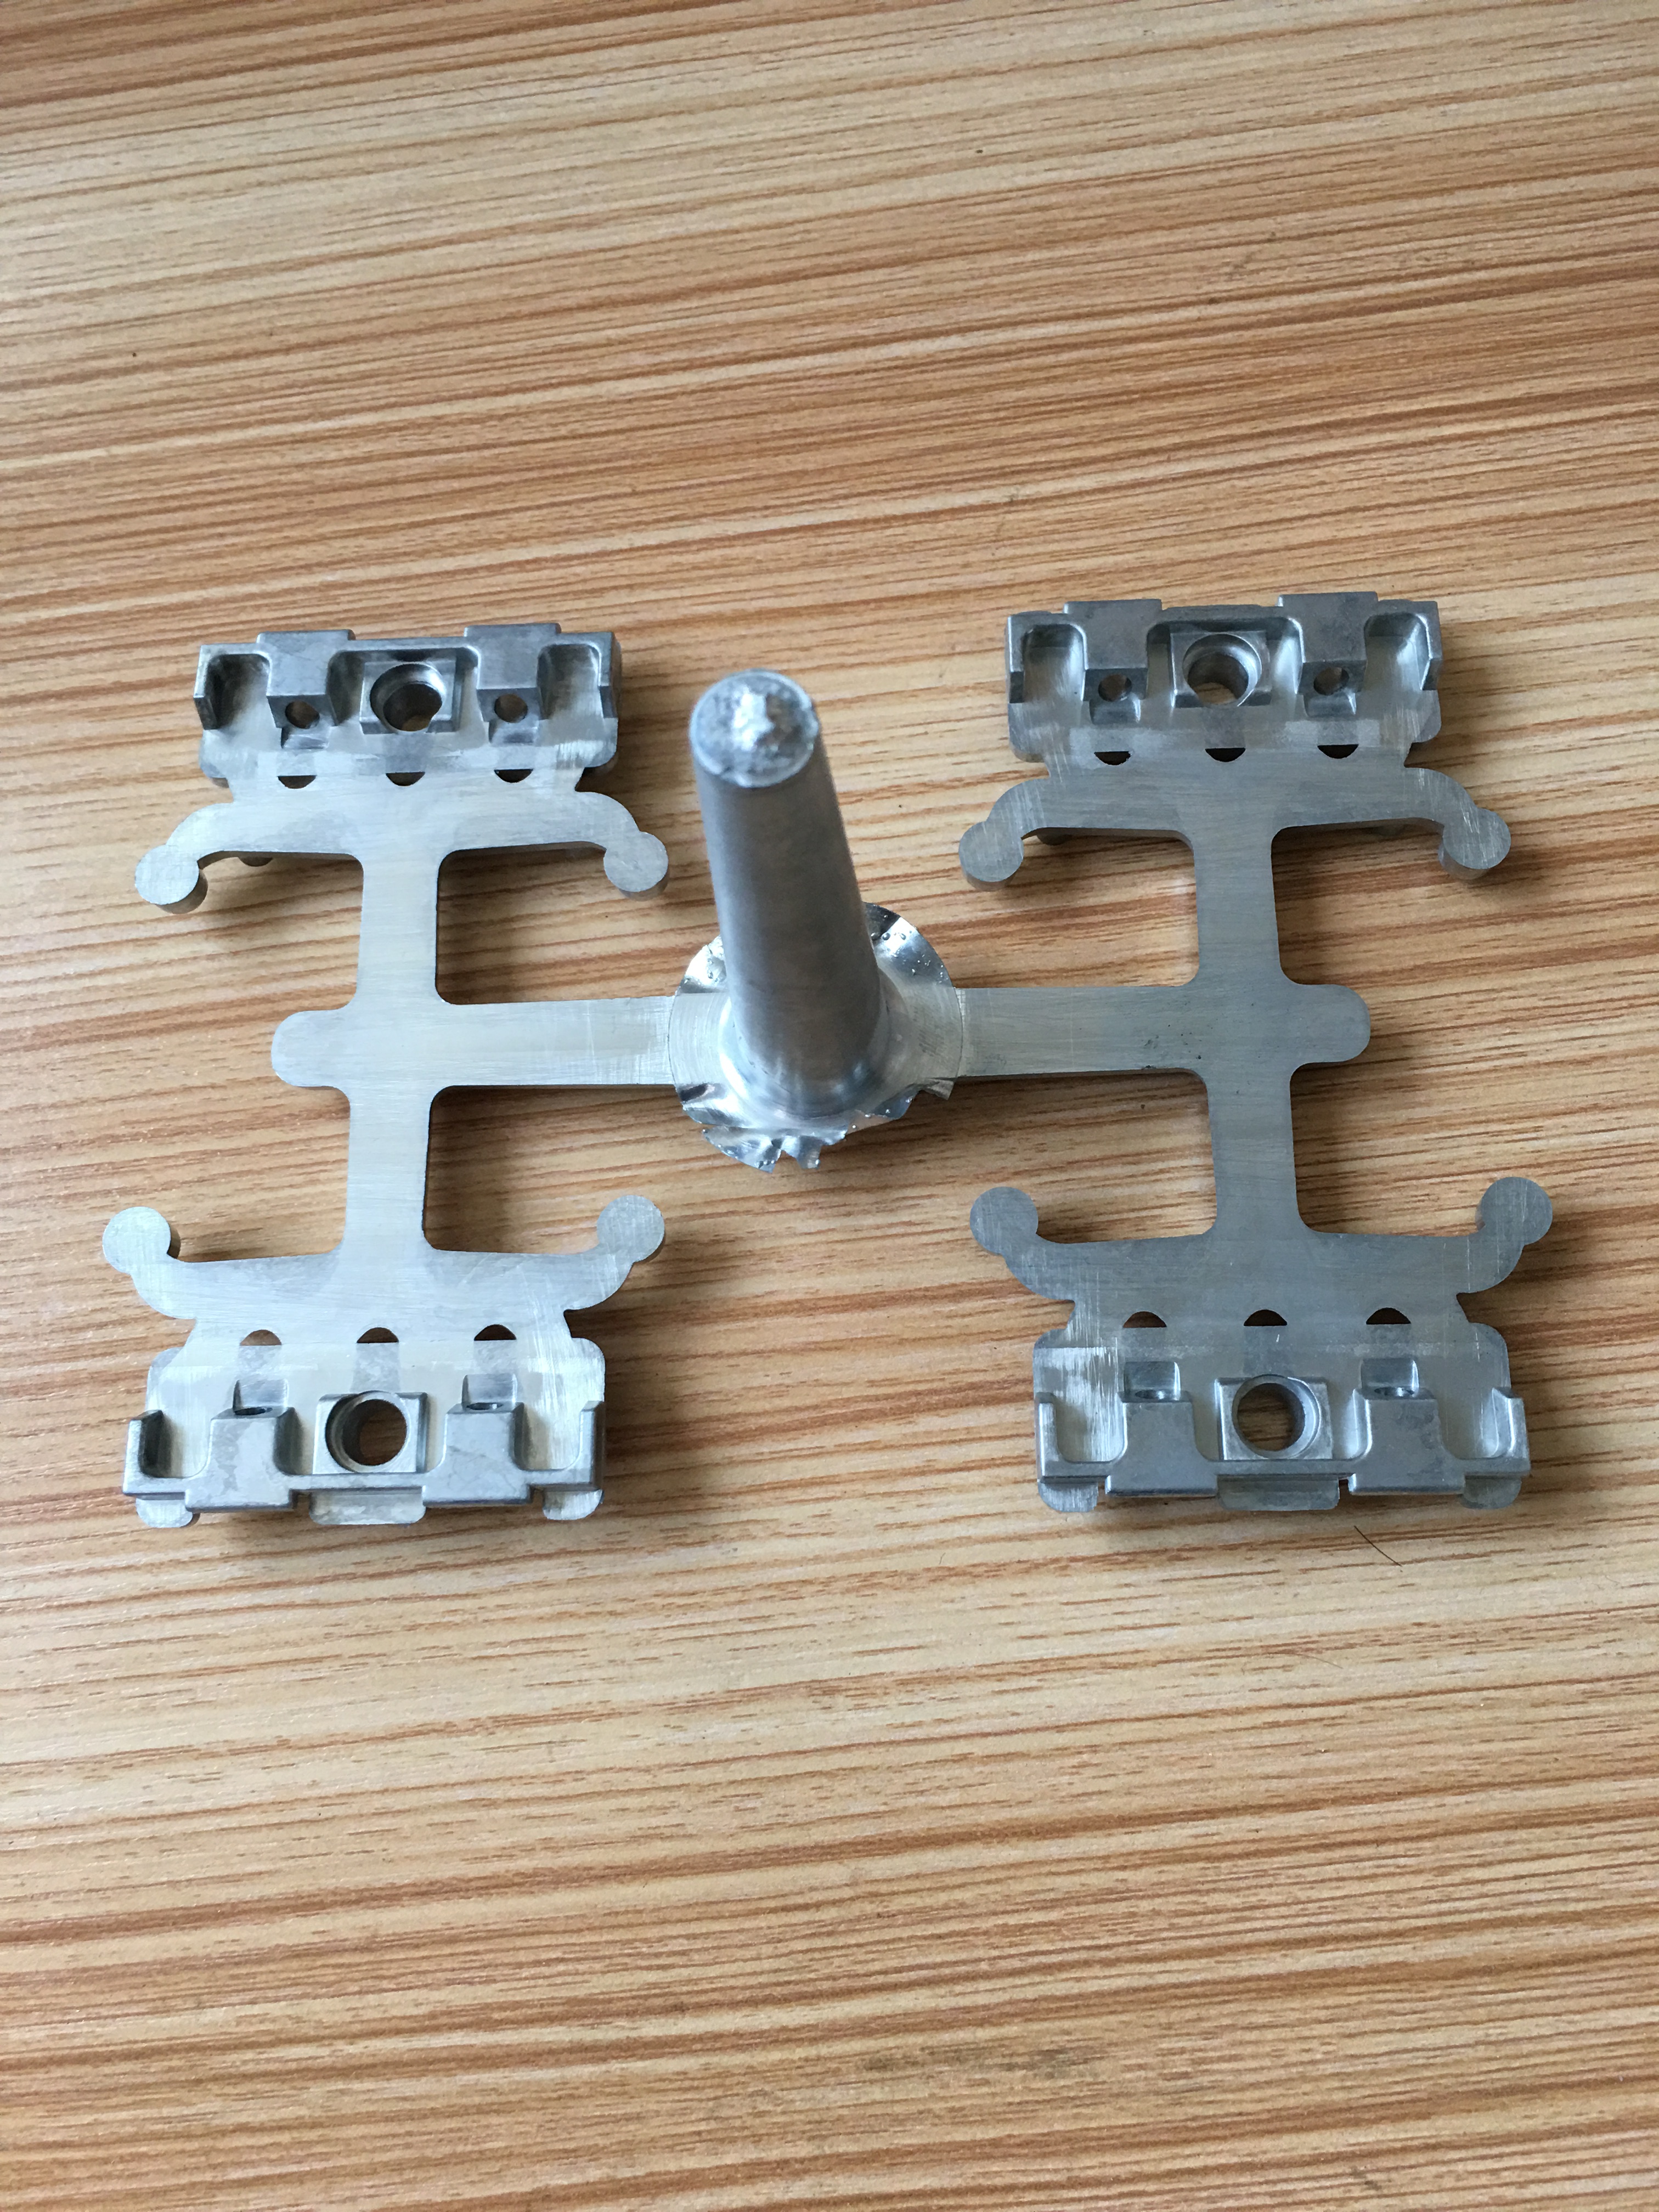 As a plastic injection molding parts company,have any environmental measures been adopted in mold manufacturing?